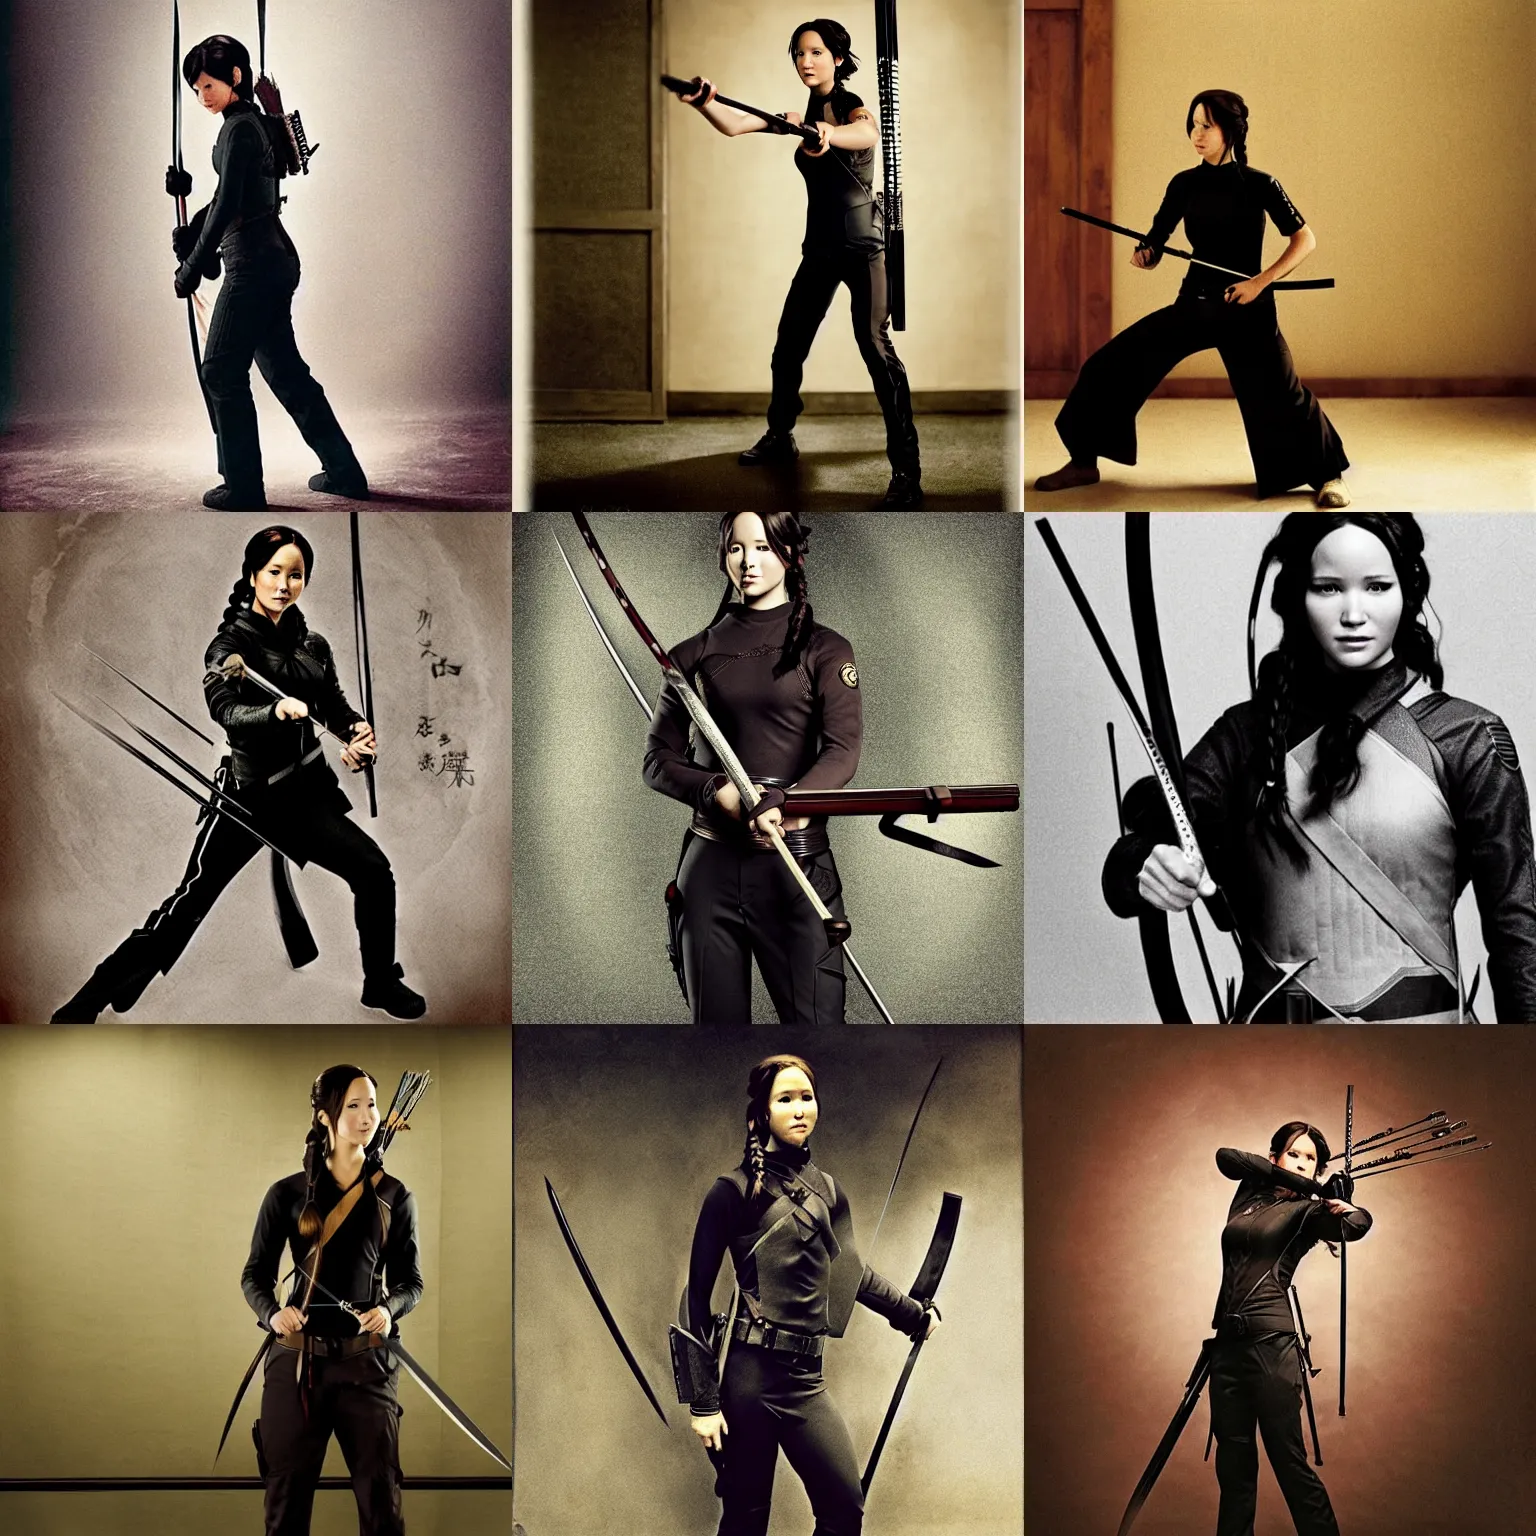 Prompt: Katniss Everdeen as a ninja, holding a katana, in a Japanese dojo, photo by Annie Leibovitz